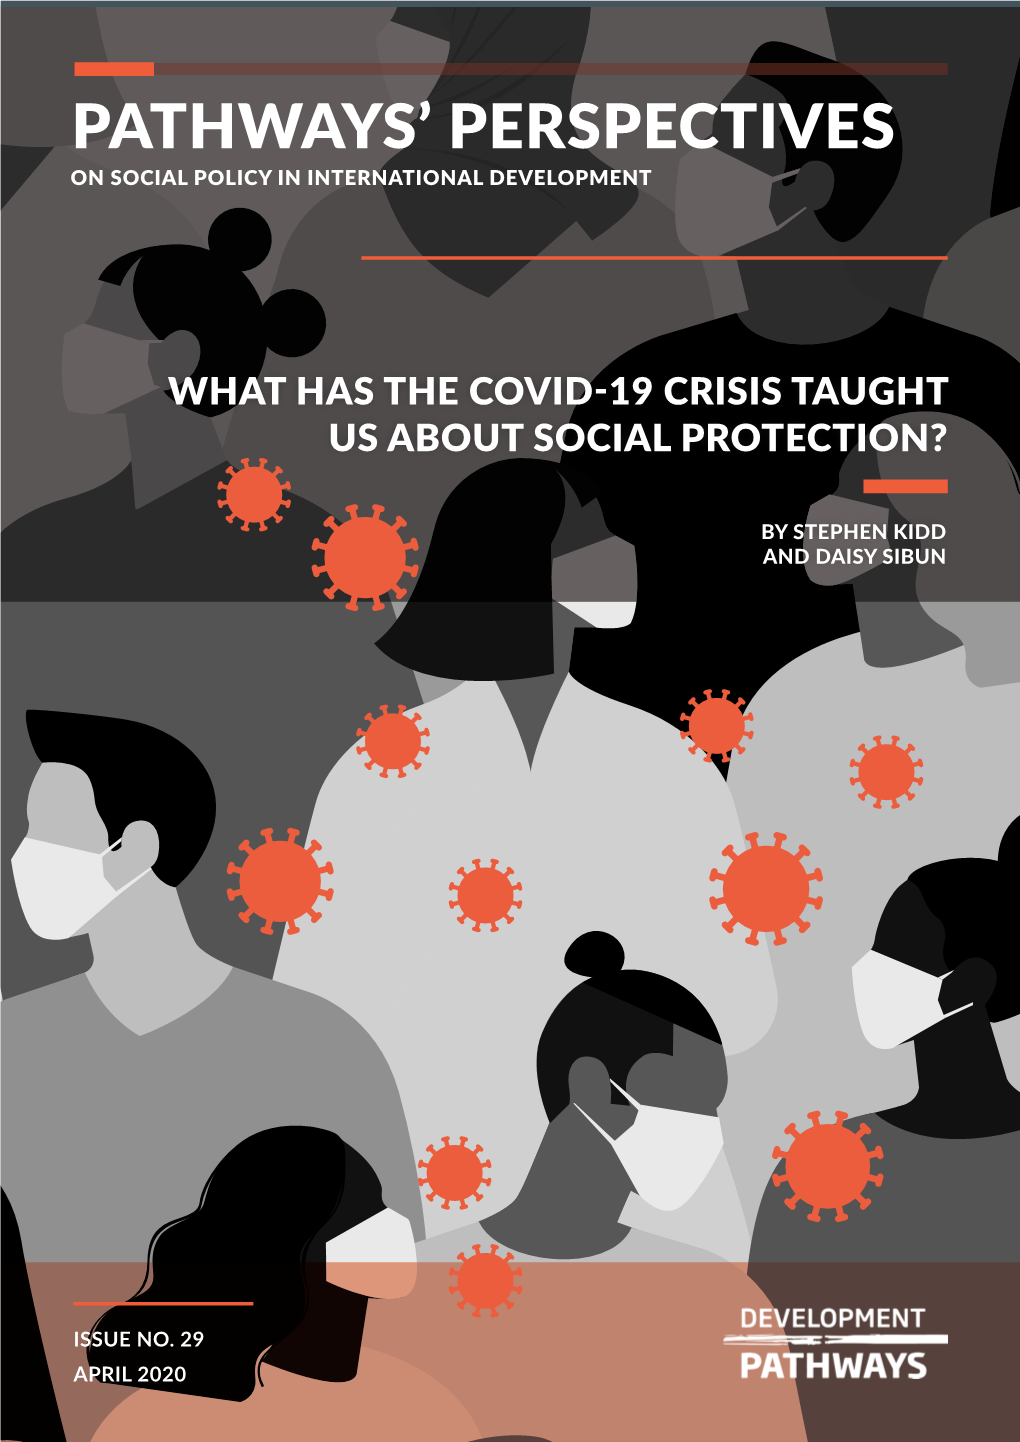 Pathways' Perspectives Stephen Kidd and Daisy Sibun Reflect on Some of the Key Lessons They Have Learnt About Social Protection in the Midst of the COVID-19 Crisis